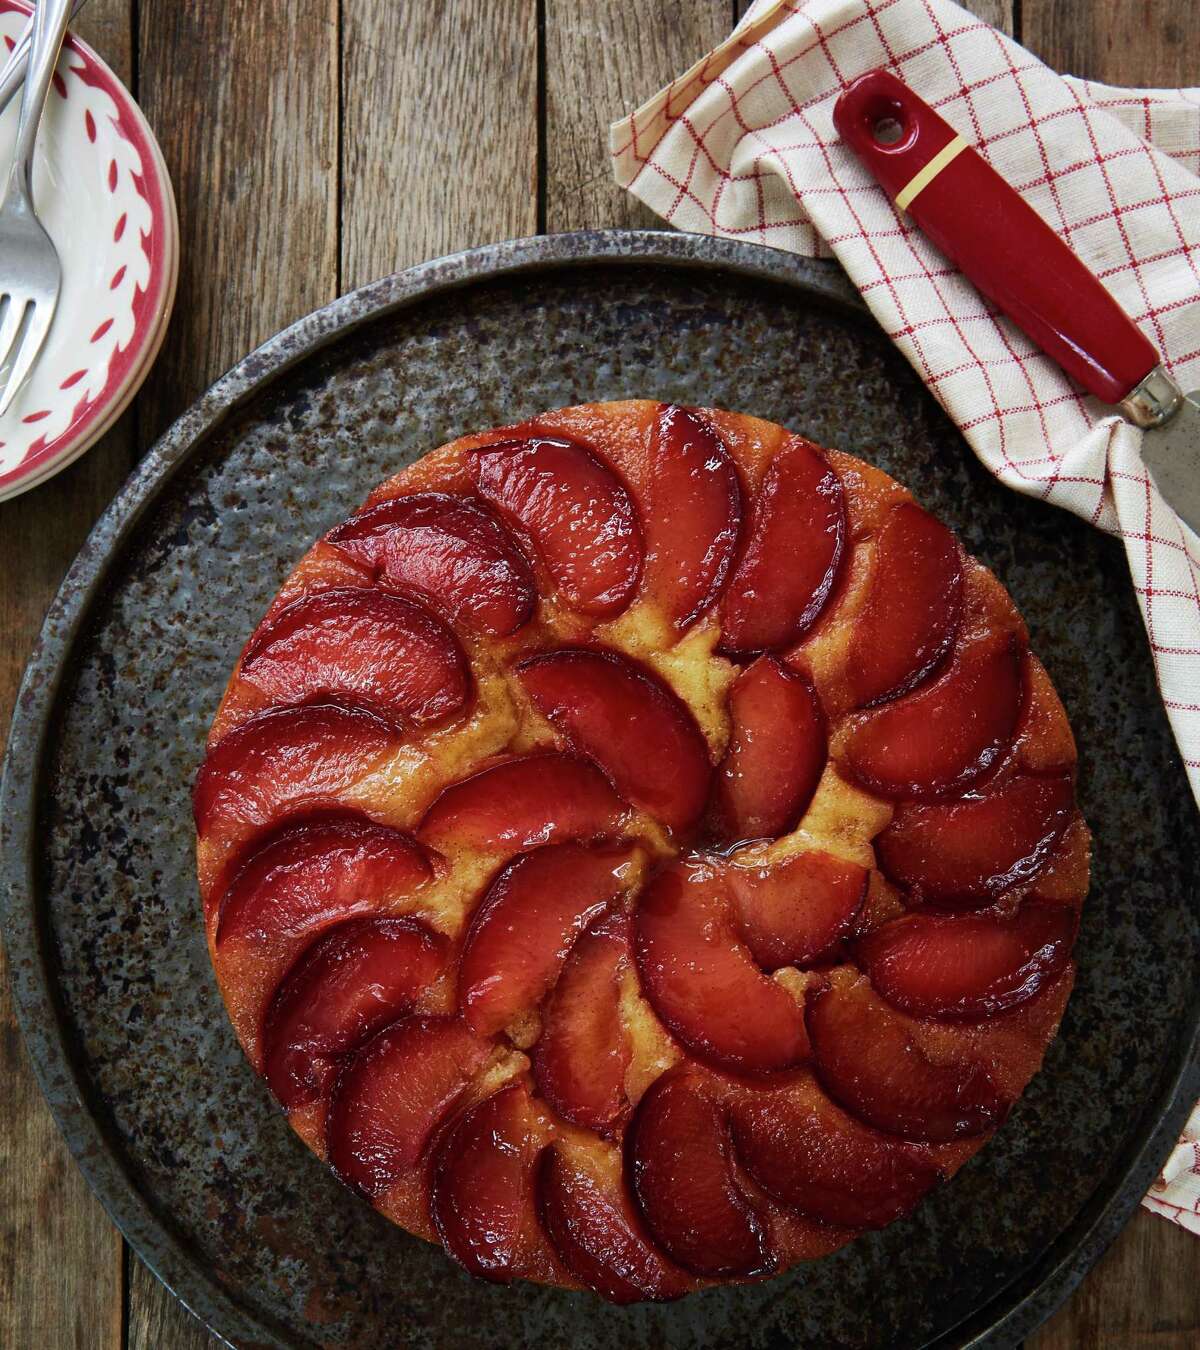 Plum Upside Down Cake from "The Duke's Mayonnaise Cookbook" by Ashley Strickland Freeman.